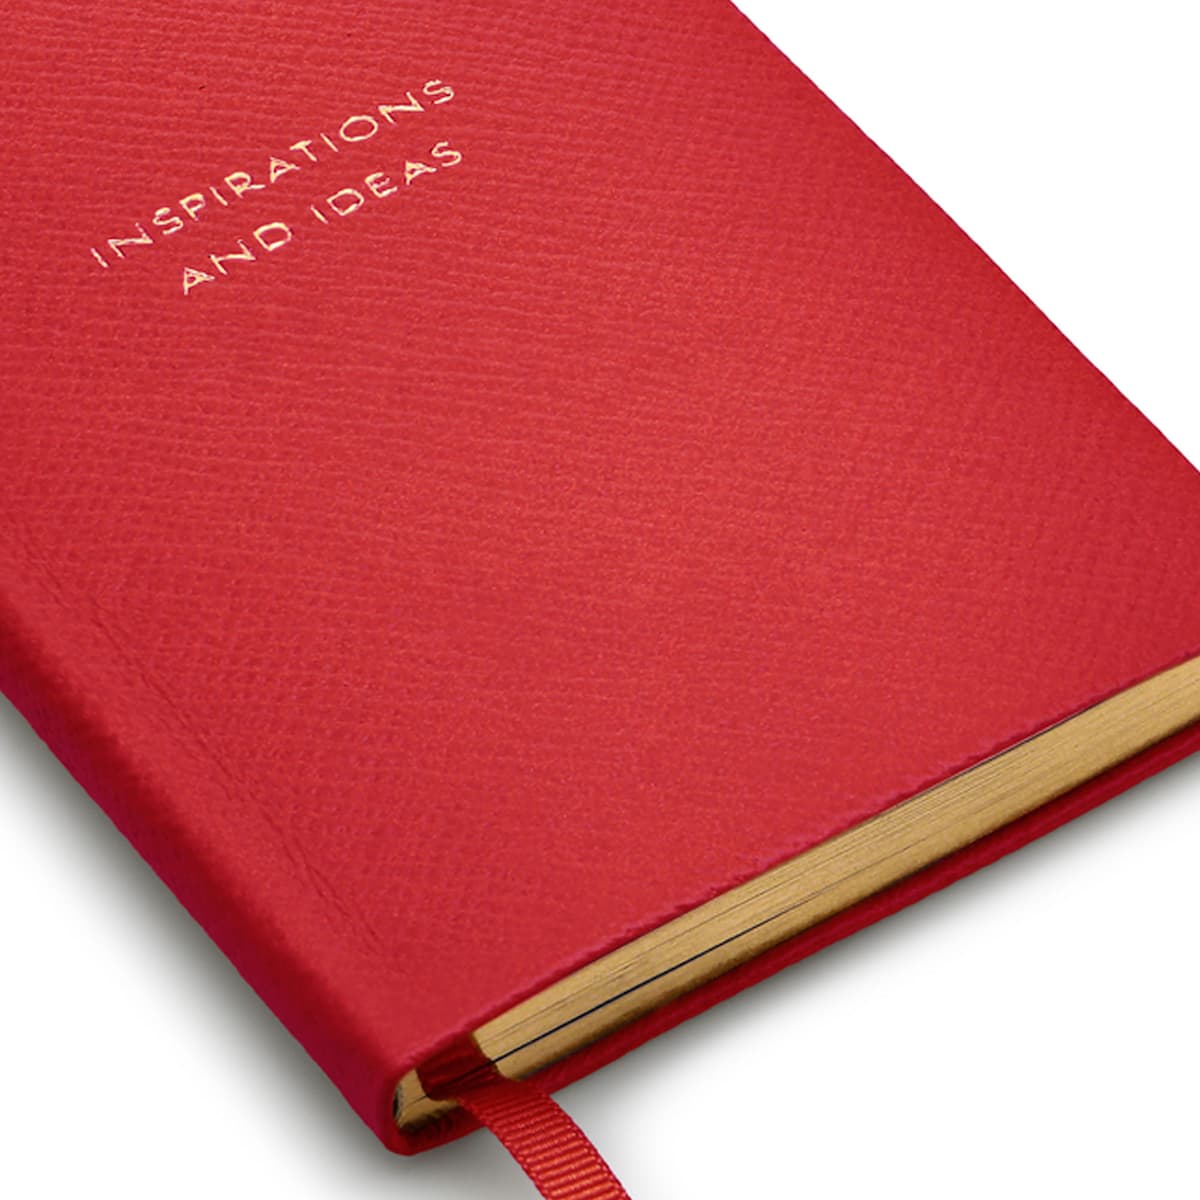 Buy Inspirations and Ideas Panama Notebook - Scarlet Red from Smythson